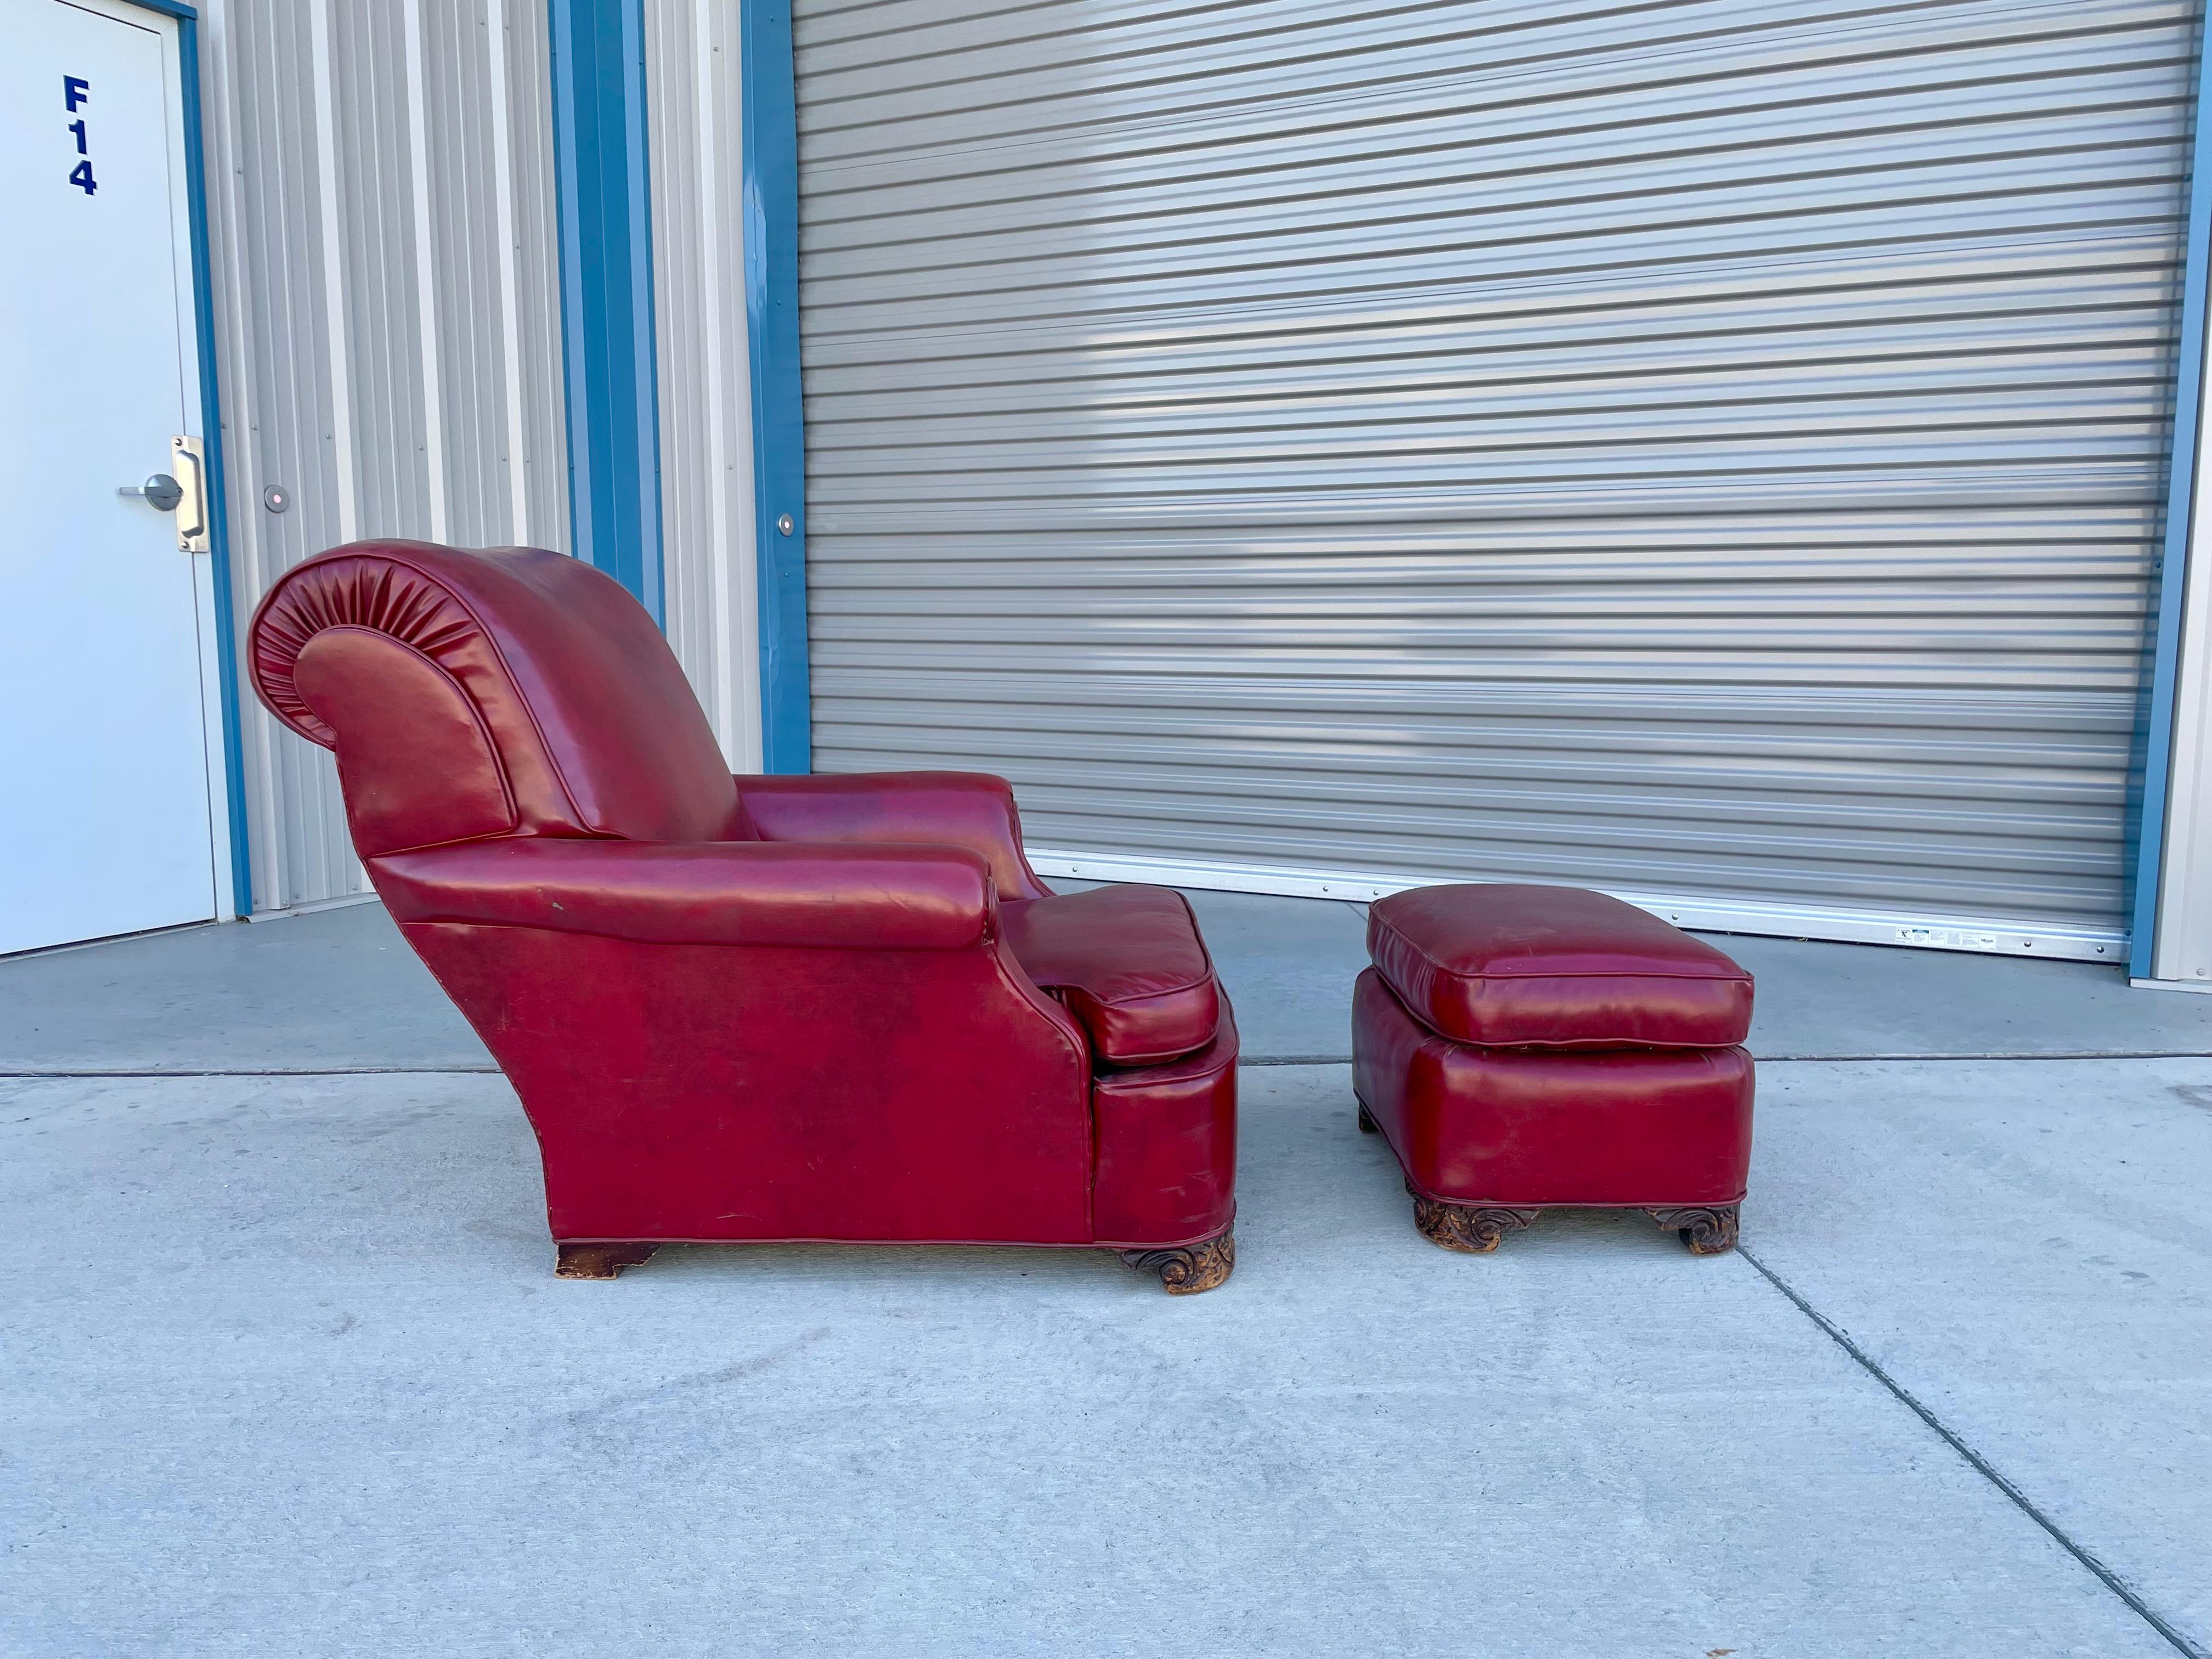 1950s Vintage Leather Chair & Ottoman - Set of 2 In Good Condition For Sale In North Hollywood, CA